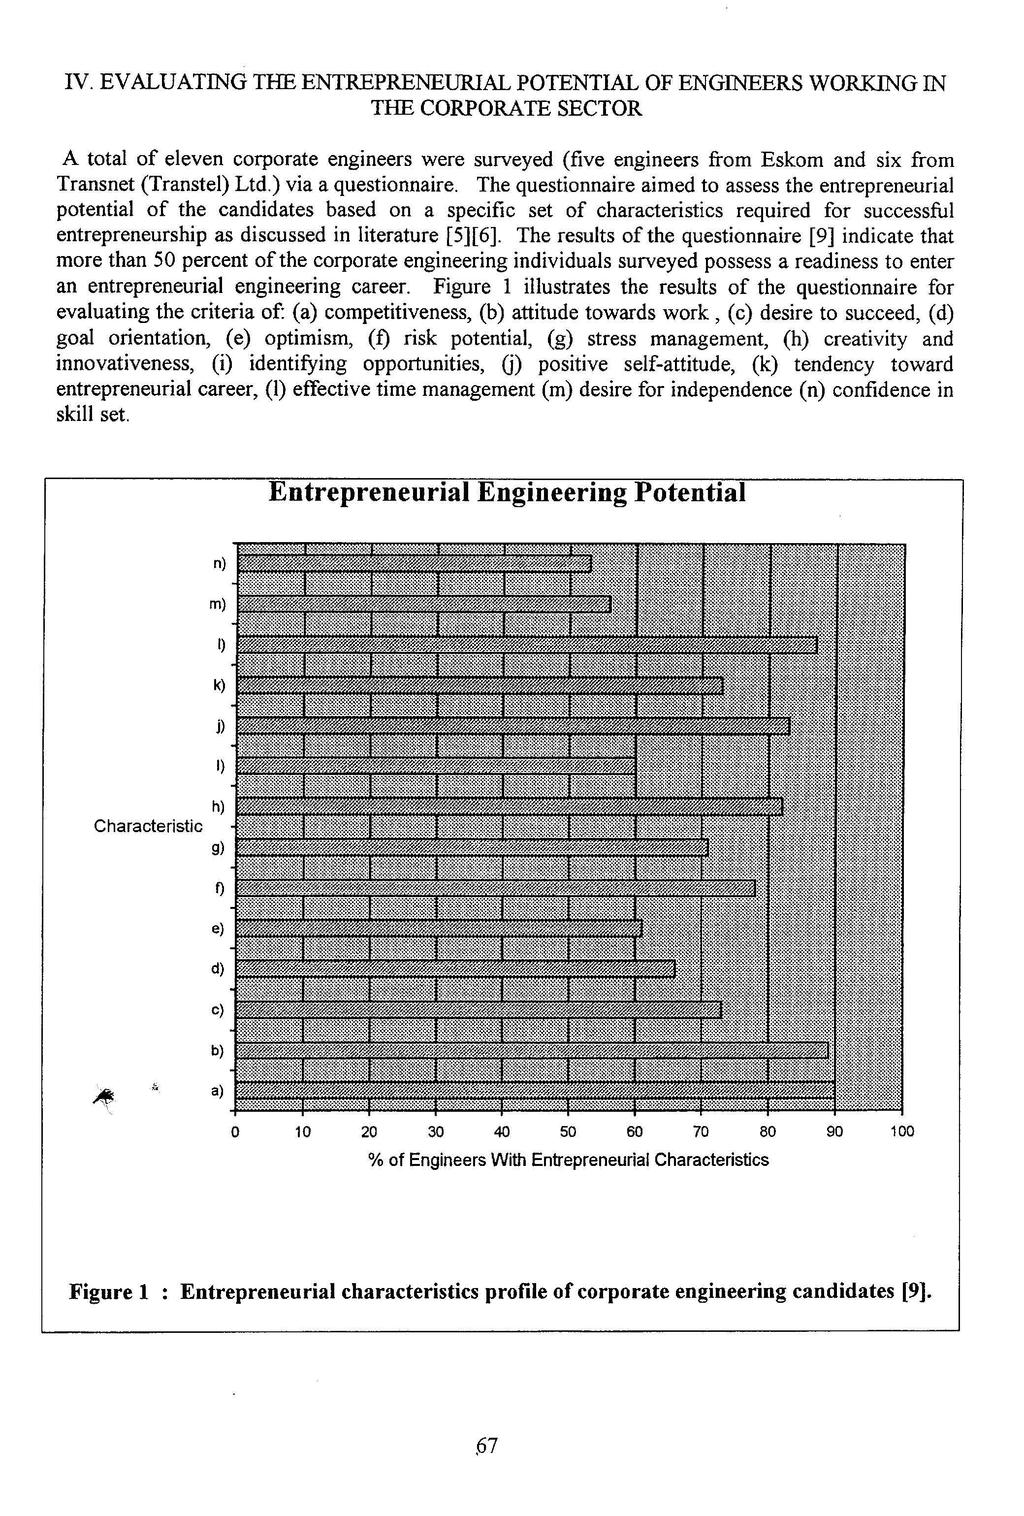 IV. EVALUATING THE ENTREPRENEURIAL POTENTIAL OF ENGINEERS WORKING IN THE CORPORATE SECTOR A total of eleven corporate engineers were surveyed (five engineers from Eskom and six from Transnet